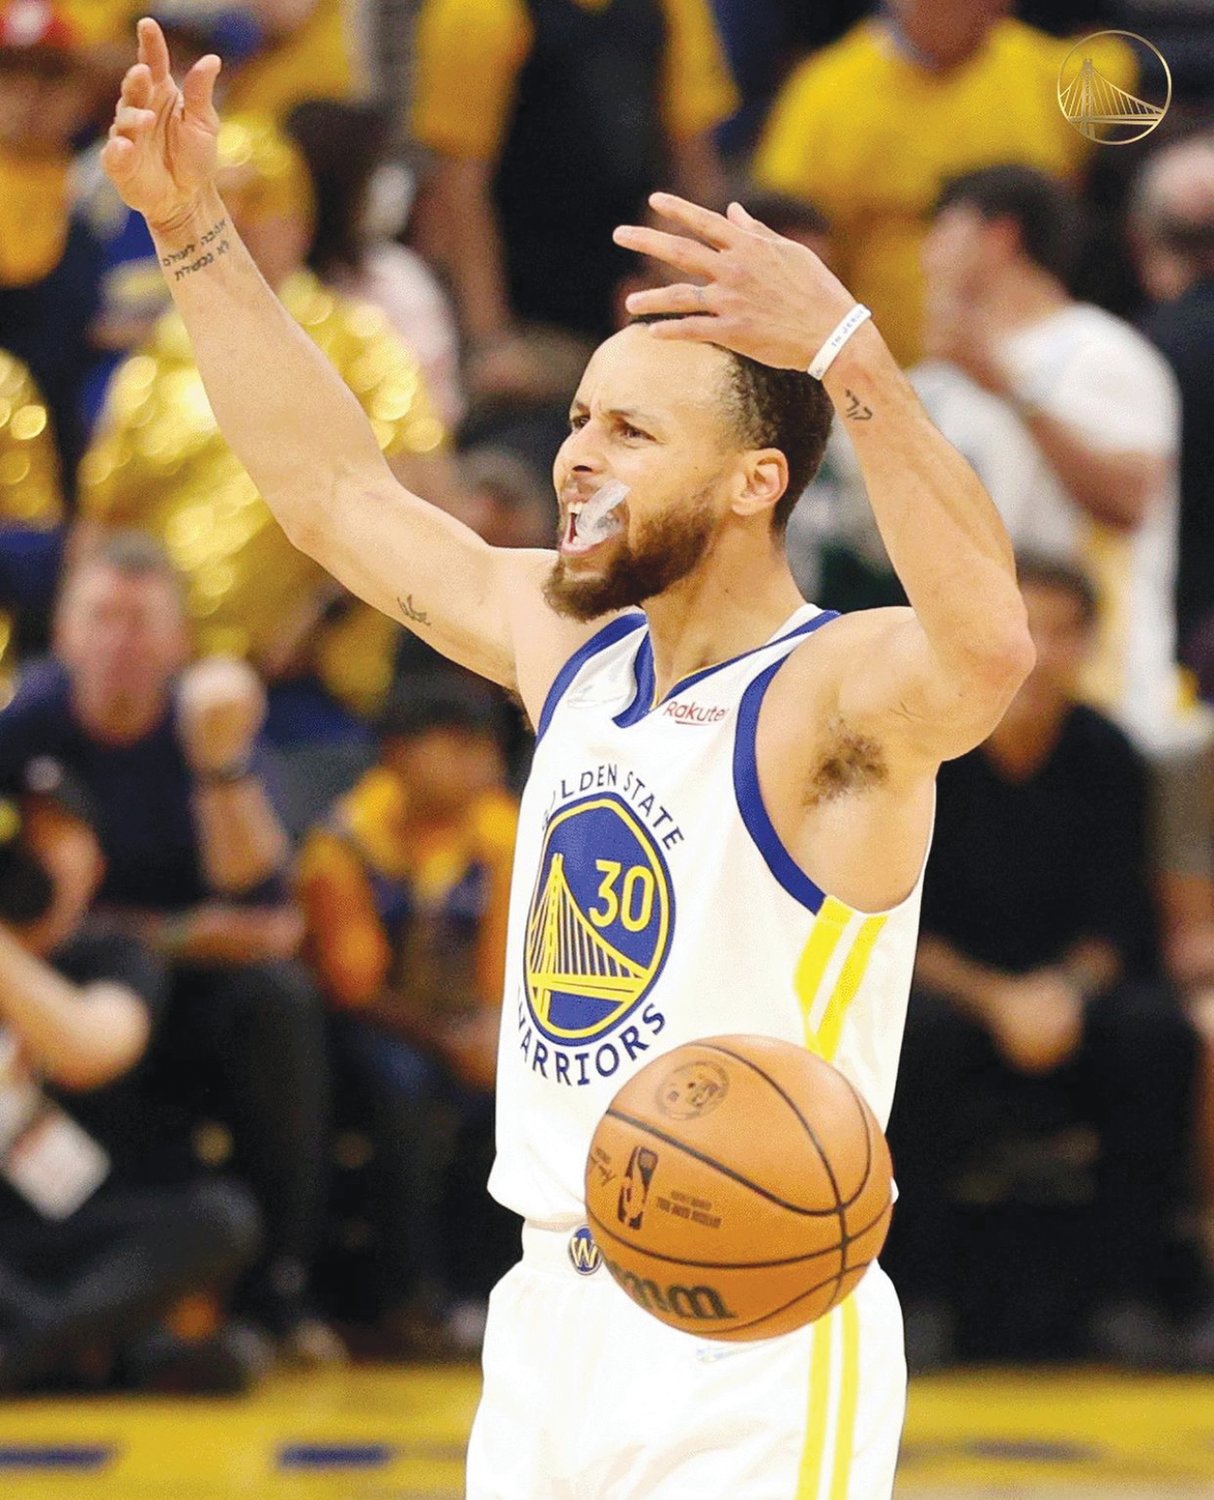 Warriors guard Steph Curry pumps up the crowd at the Chase Center during Game 5 of the NBA Finals on Monday. The Warriors pulled out the win, 104-94, to take a 3-2 series lead over the Celtics.